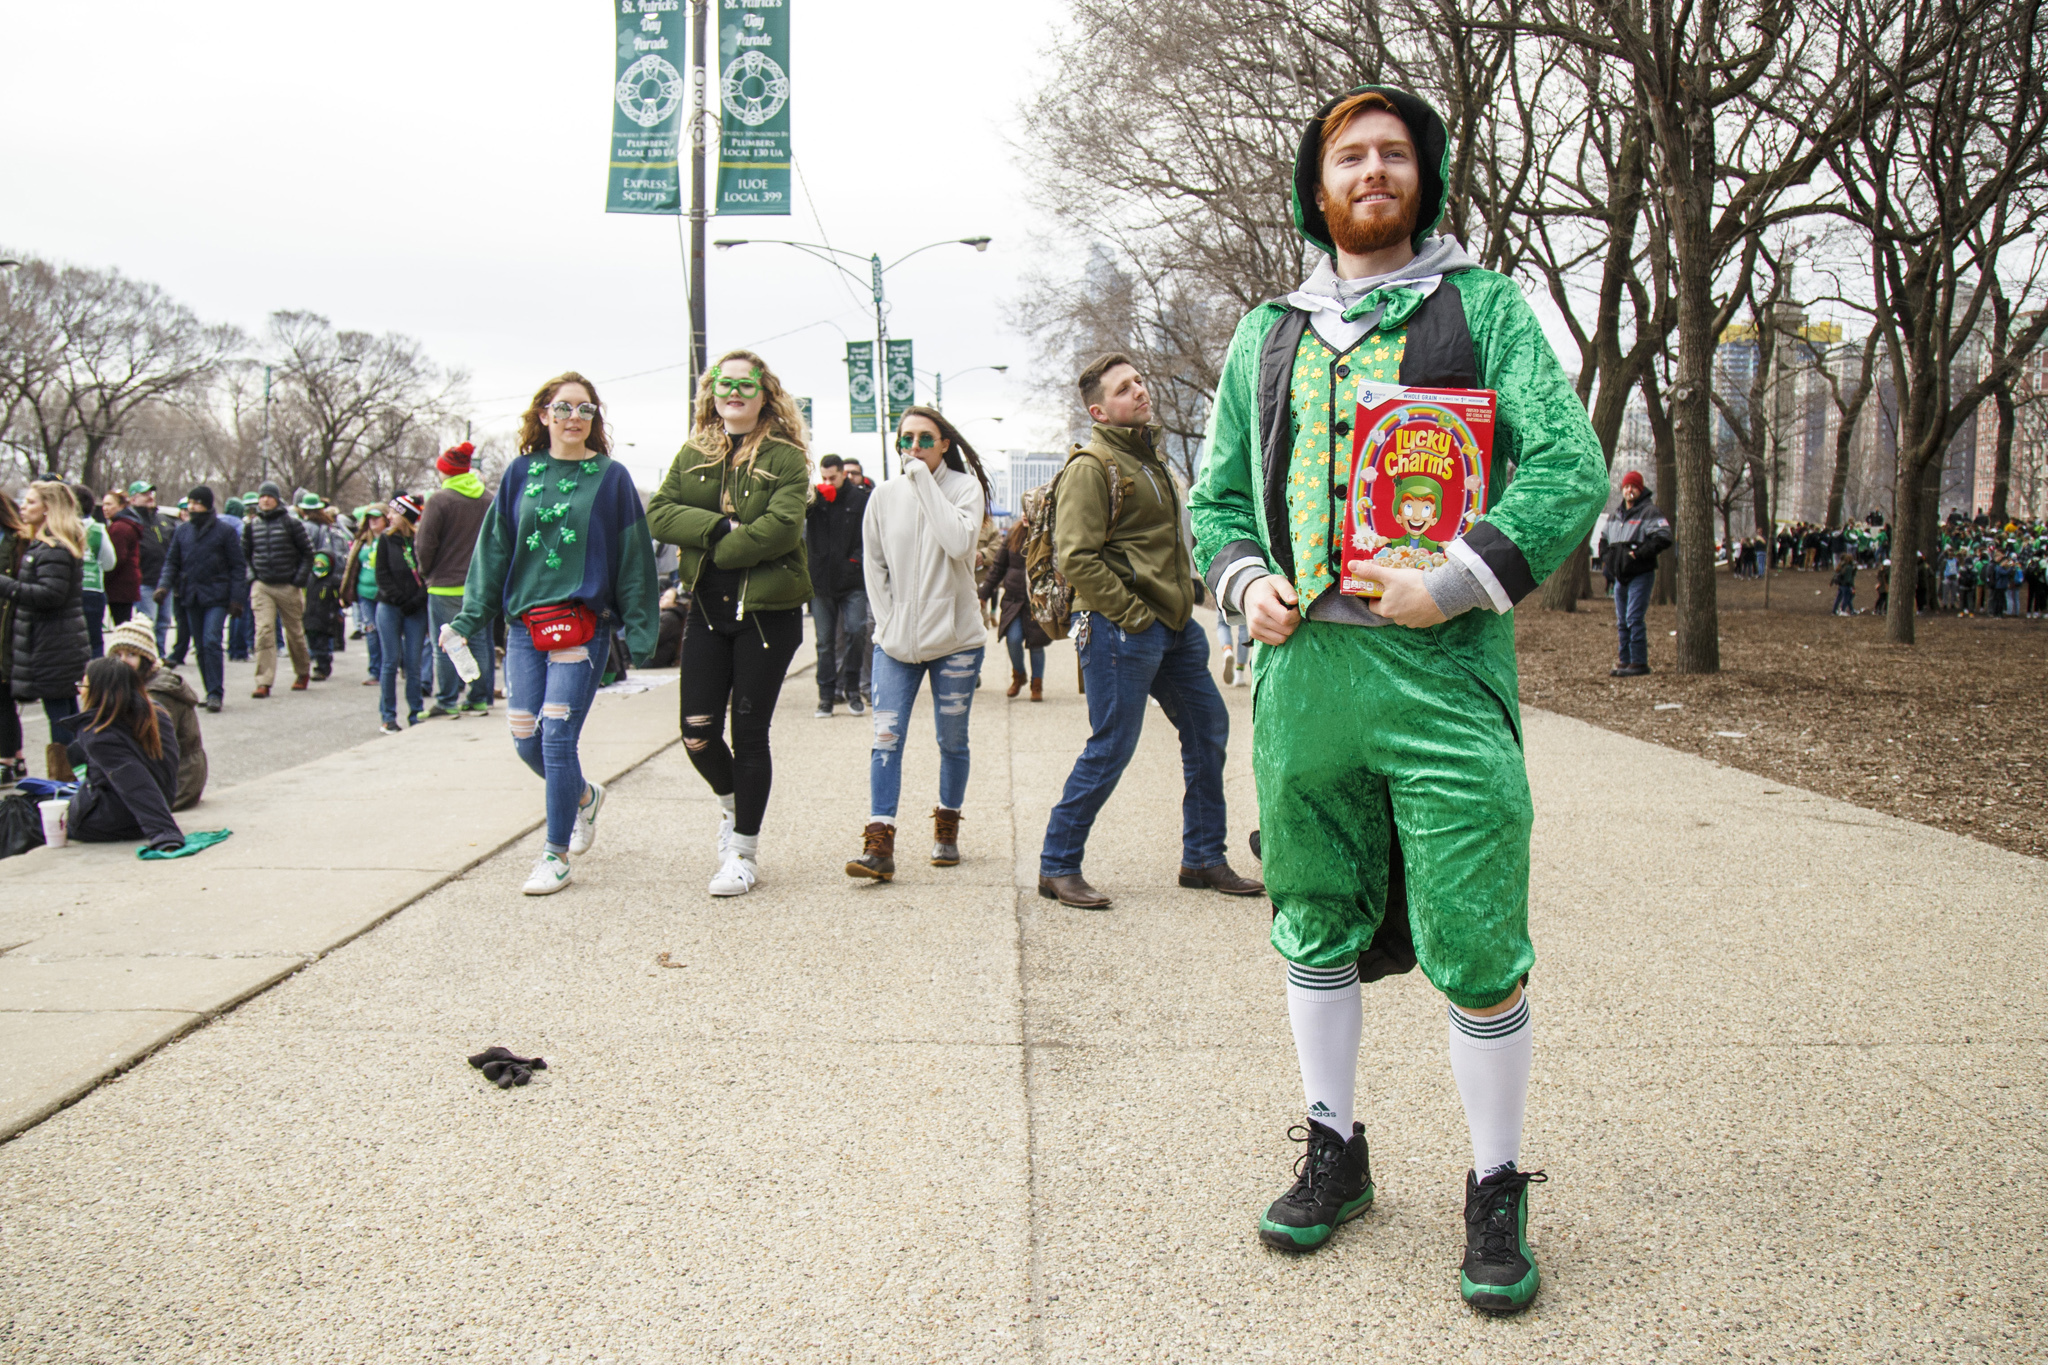 Chicago’s St. Patrick’s Day parade and river dyeing turned the city green